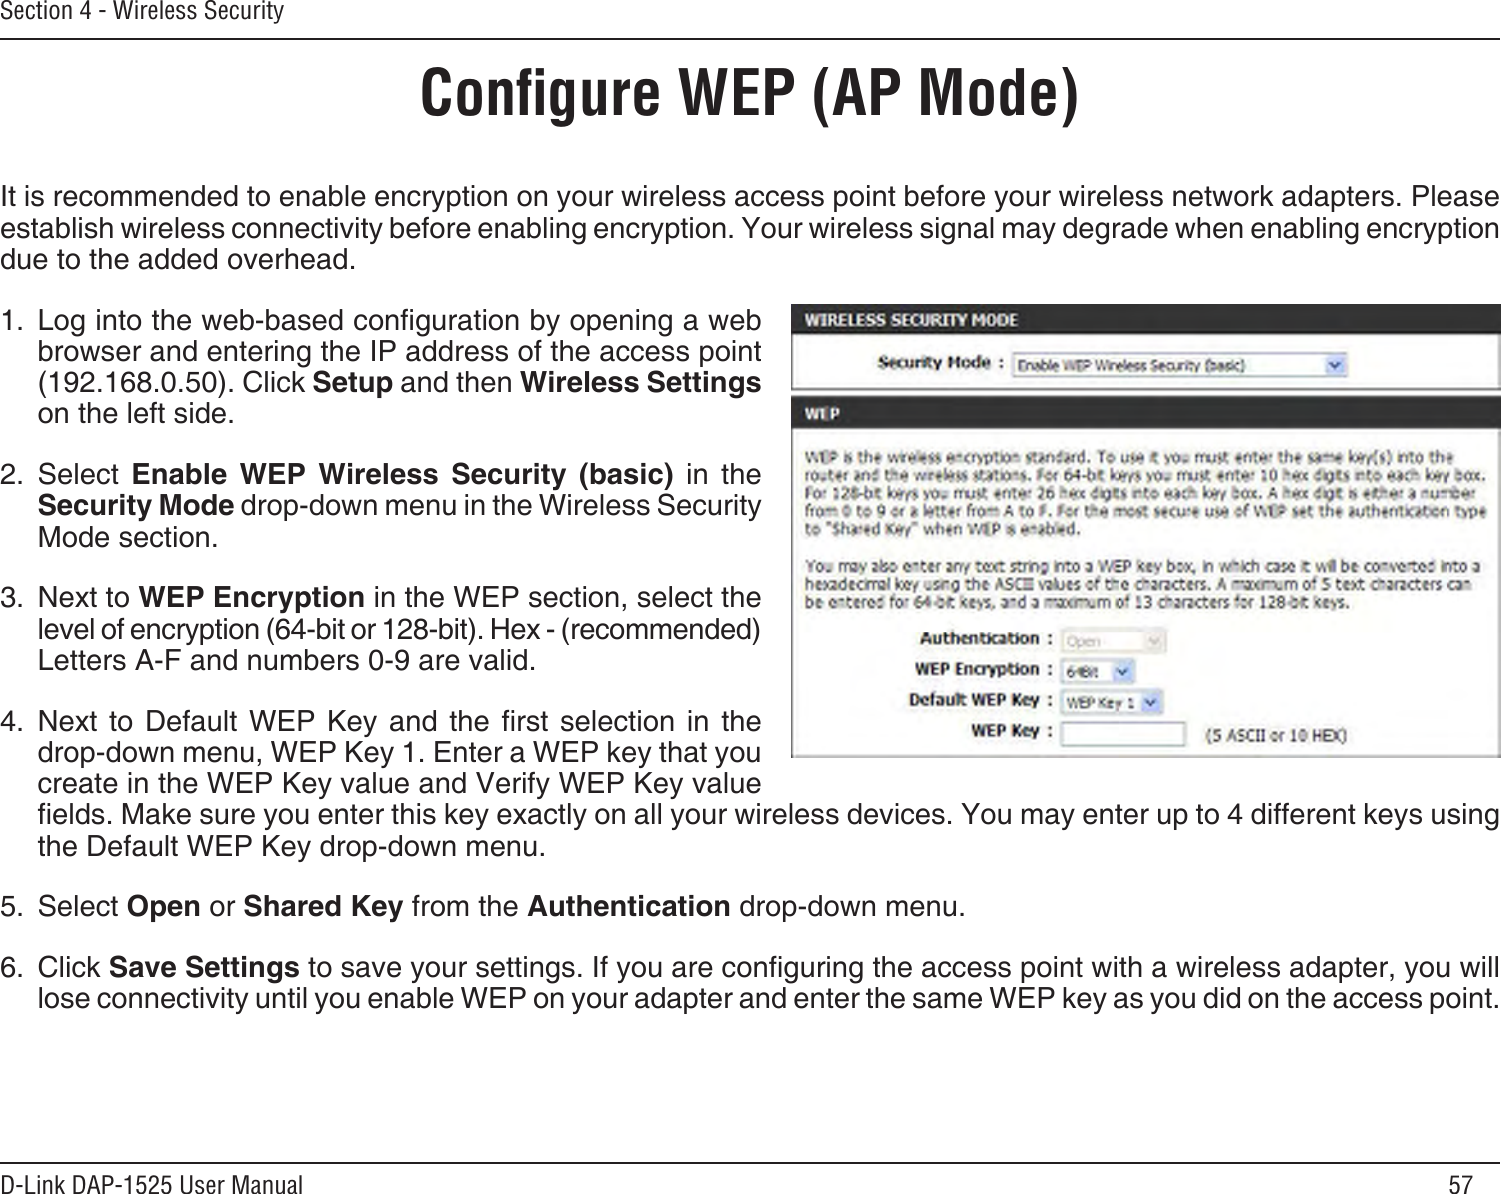 57D-Link DAP-1525 User ManualSection 4 - Wireless SecurityConﬁgure WEP (AP Mode)It is recommended to enable encryption on your wireless access point before your wireless network adapters. Please establish wireless connectivity before enabling encryption. Your wireless signal may degrade when enabling encryption due to the added overhead.1.  Log into the web-based conguration by opening a web browser and entering the IP address of the access point (192.168.0.50). Click Setup and then Wireless Settings on the left side.2.  Select  Enable  WEP  Wireless  Security  (basic)  in  the Security Mode drop-down menu in the Wireless Security Mode section.3.  Next to WEP Encryption in the WEP section, select the level of encryption (64-bit or 128-bit). Hex - (recommended) Letters A-F and numbers 0-9 are valid.4.  Next  to  Default  WEP  Key  and  the  rst  selection  in  the drop-down menu, WEP Key 1. Enter a WEP key that you create in the WEP Key value and Verify WEP Key value elds. Make sure you enter this key exactly on all your wireless devices. You may enter up to 4 different keys using the Default WEP Key drop-down menu.5.  Select Open or Shared Key from the Authentication drop-down menu.6.  Click Save Settings to save your settings. If you are conguring the access point with a wireless adapter, you will lose connectivity until you enable WEP on your adapter and enter the same WEP key as you did on the access point.